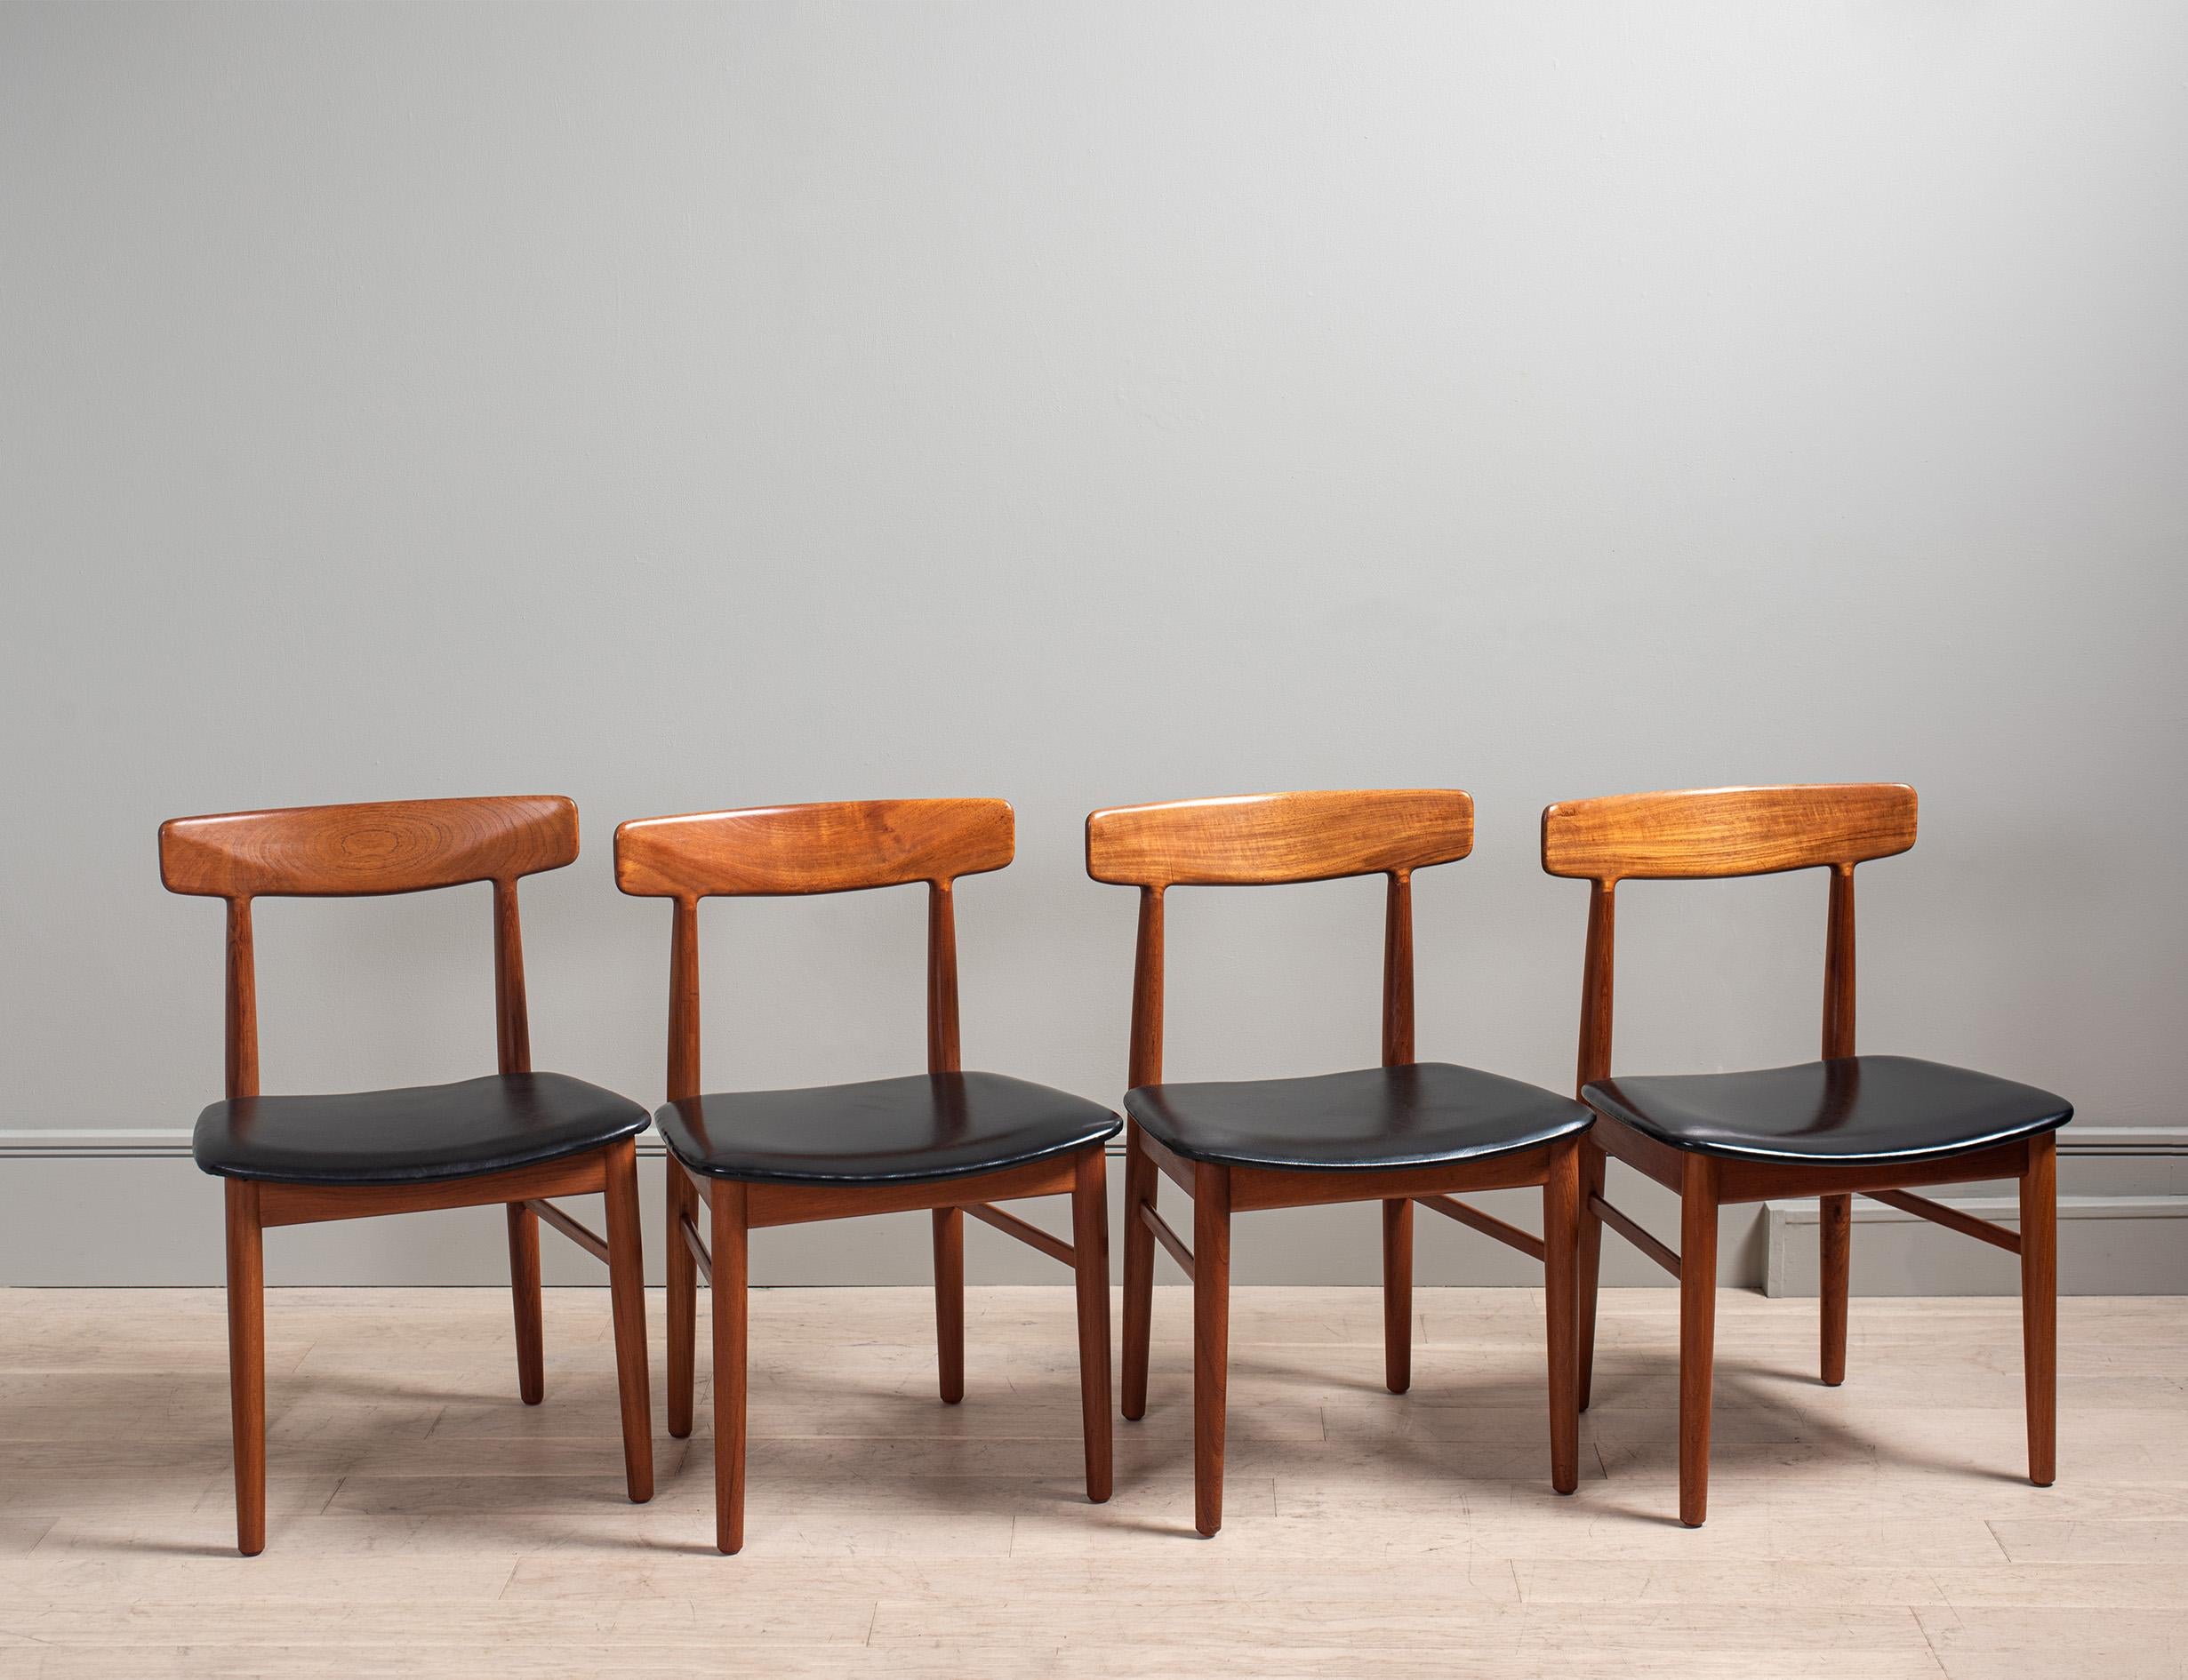 Unusual set of 8 solid teak dining chairs by Henning Kjaernulf, Bruno Hansen, Denmark circa 1950's. Superb design with sculpted and shaped angled back rests and black vinyl seats. Wonderfully coloured wood frames. Cleaned and polished